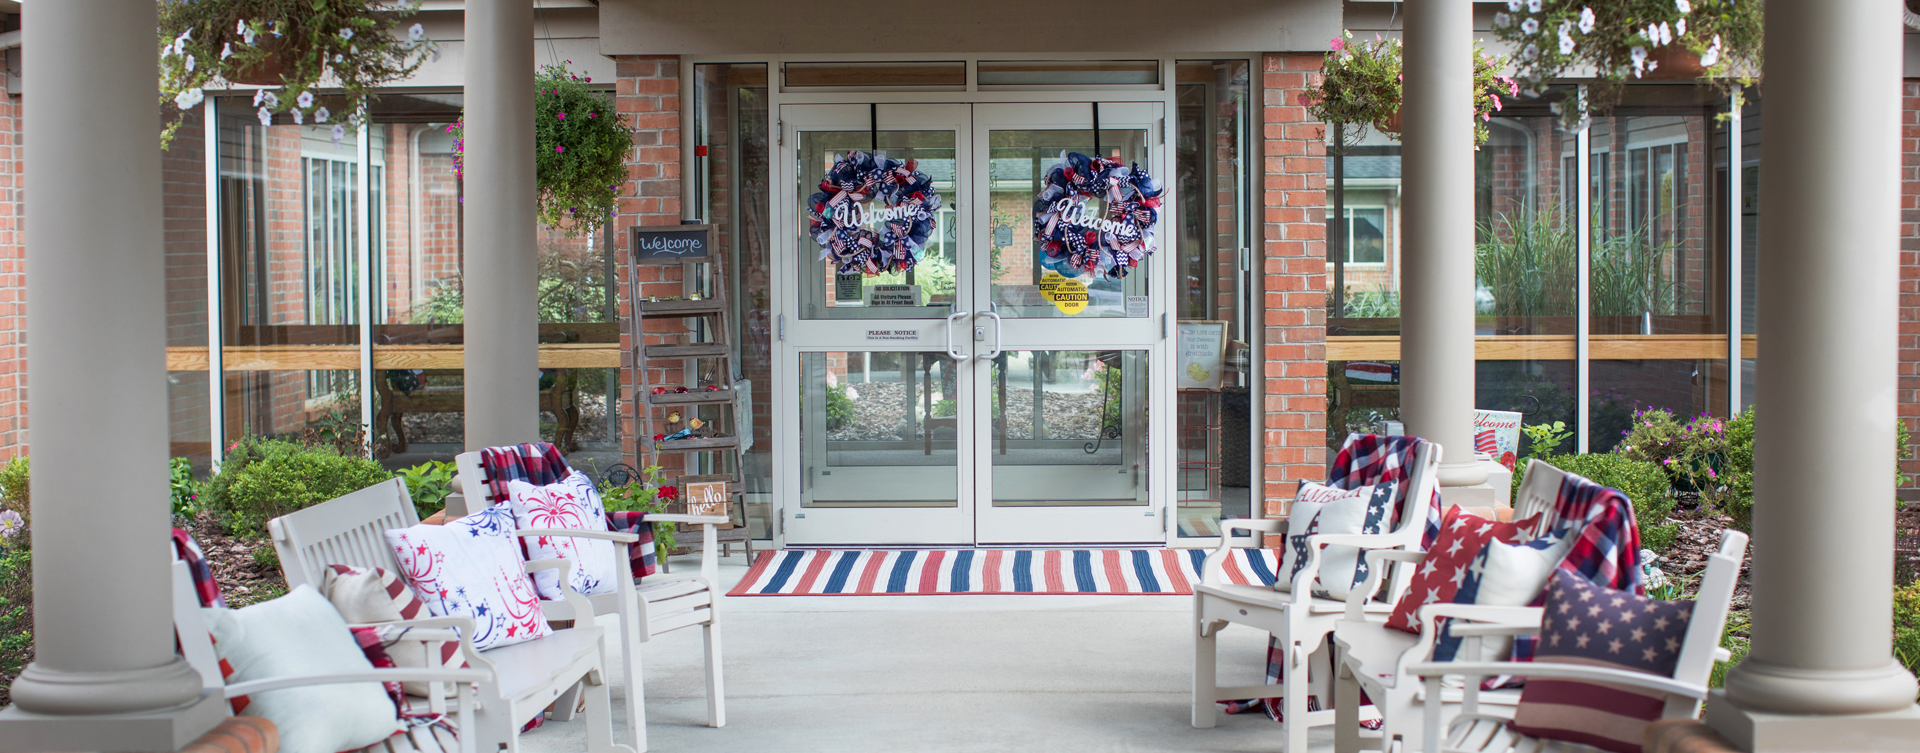 Relax in your favorite chair on the porch at Bickford of Lancaster